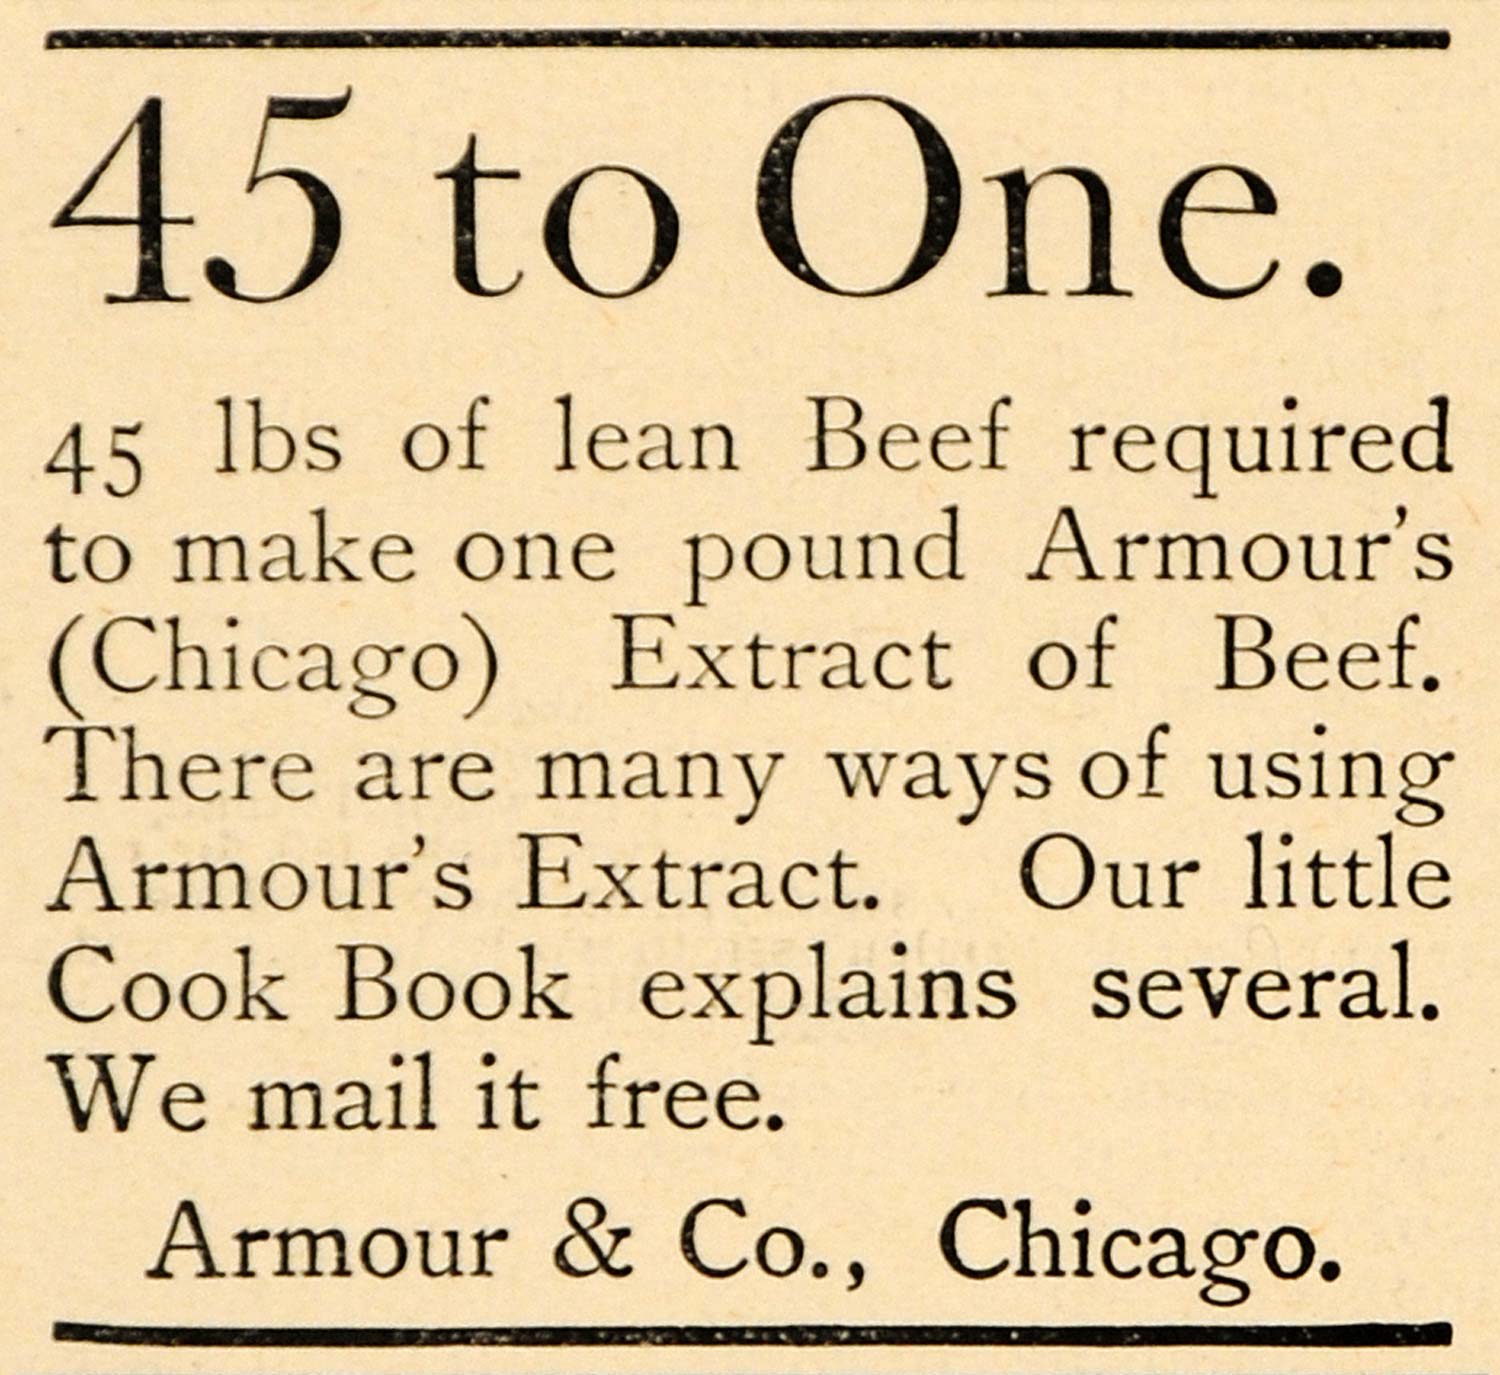 1892 Ad Armour & Co. Extract of Beef Soup Stock Chicago - ORIGINAL LHJ4